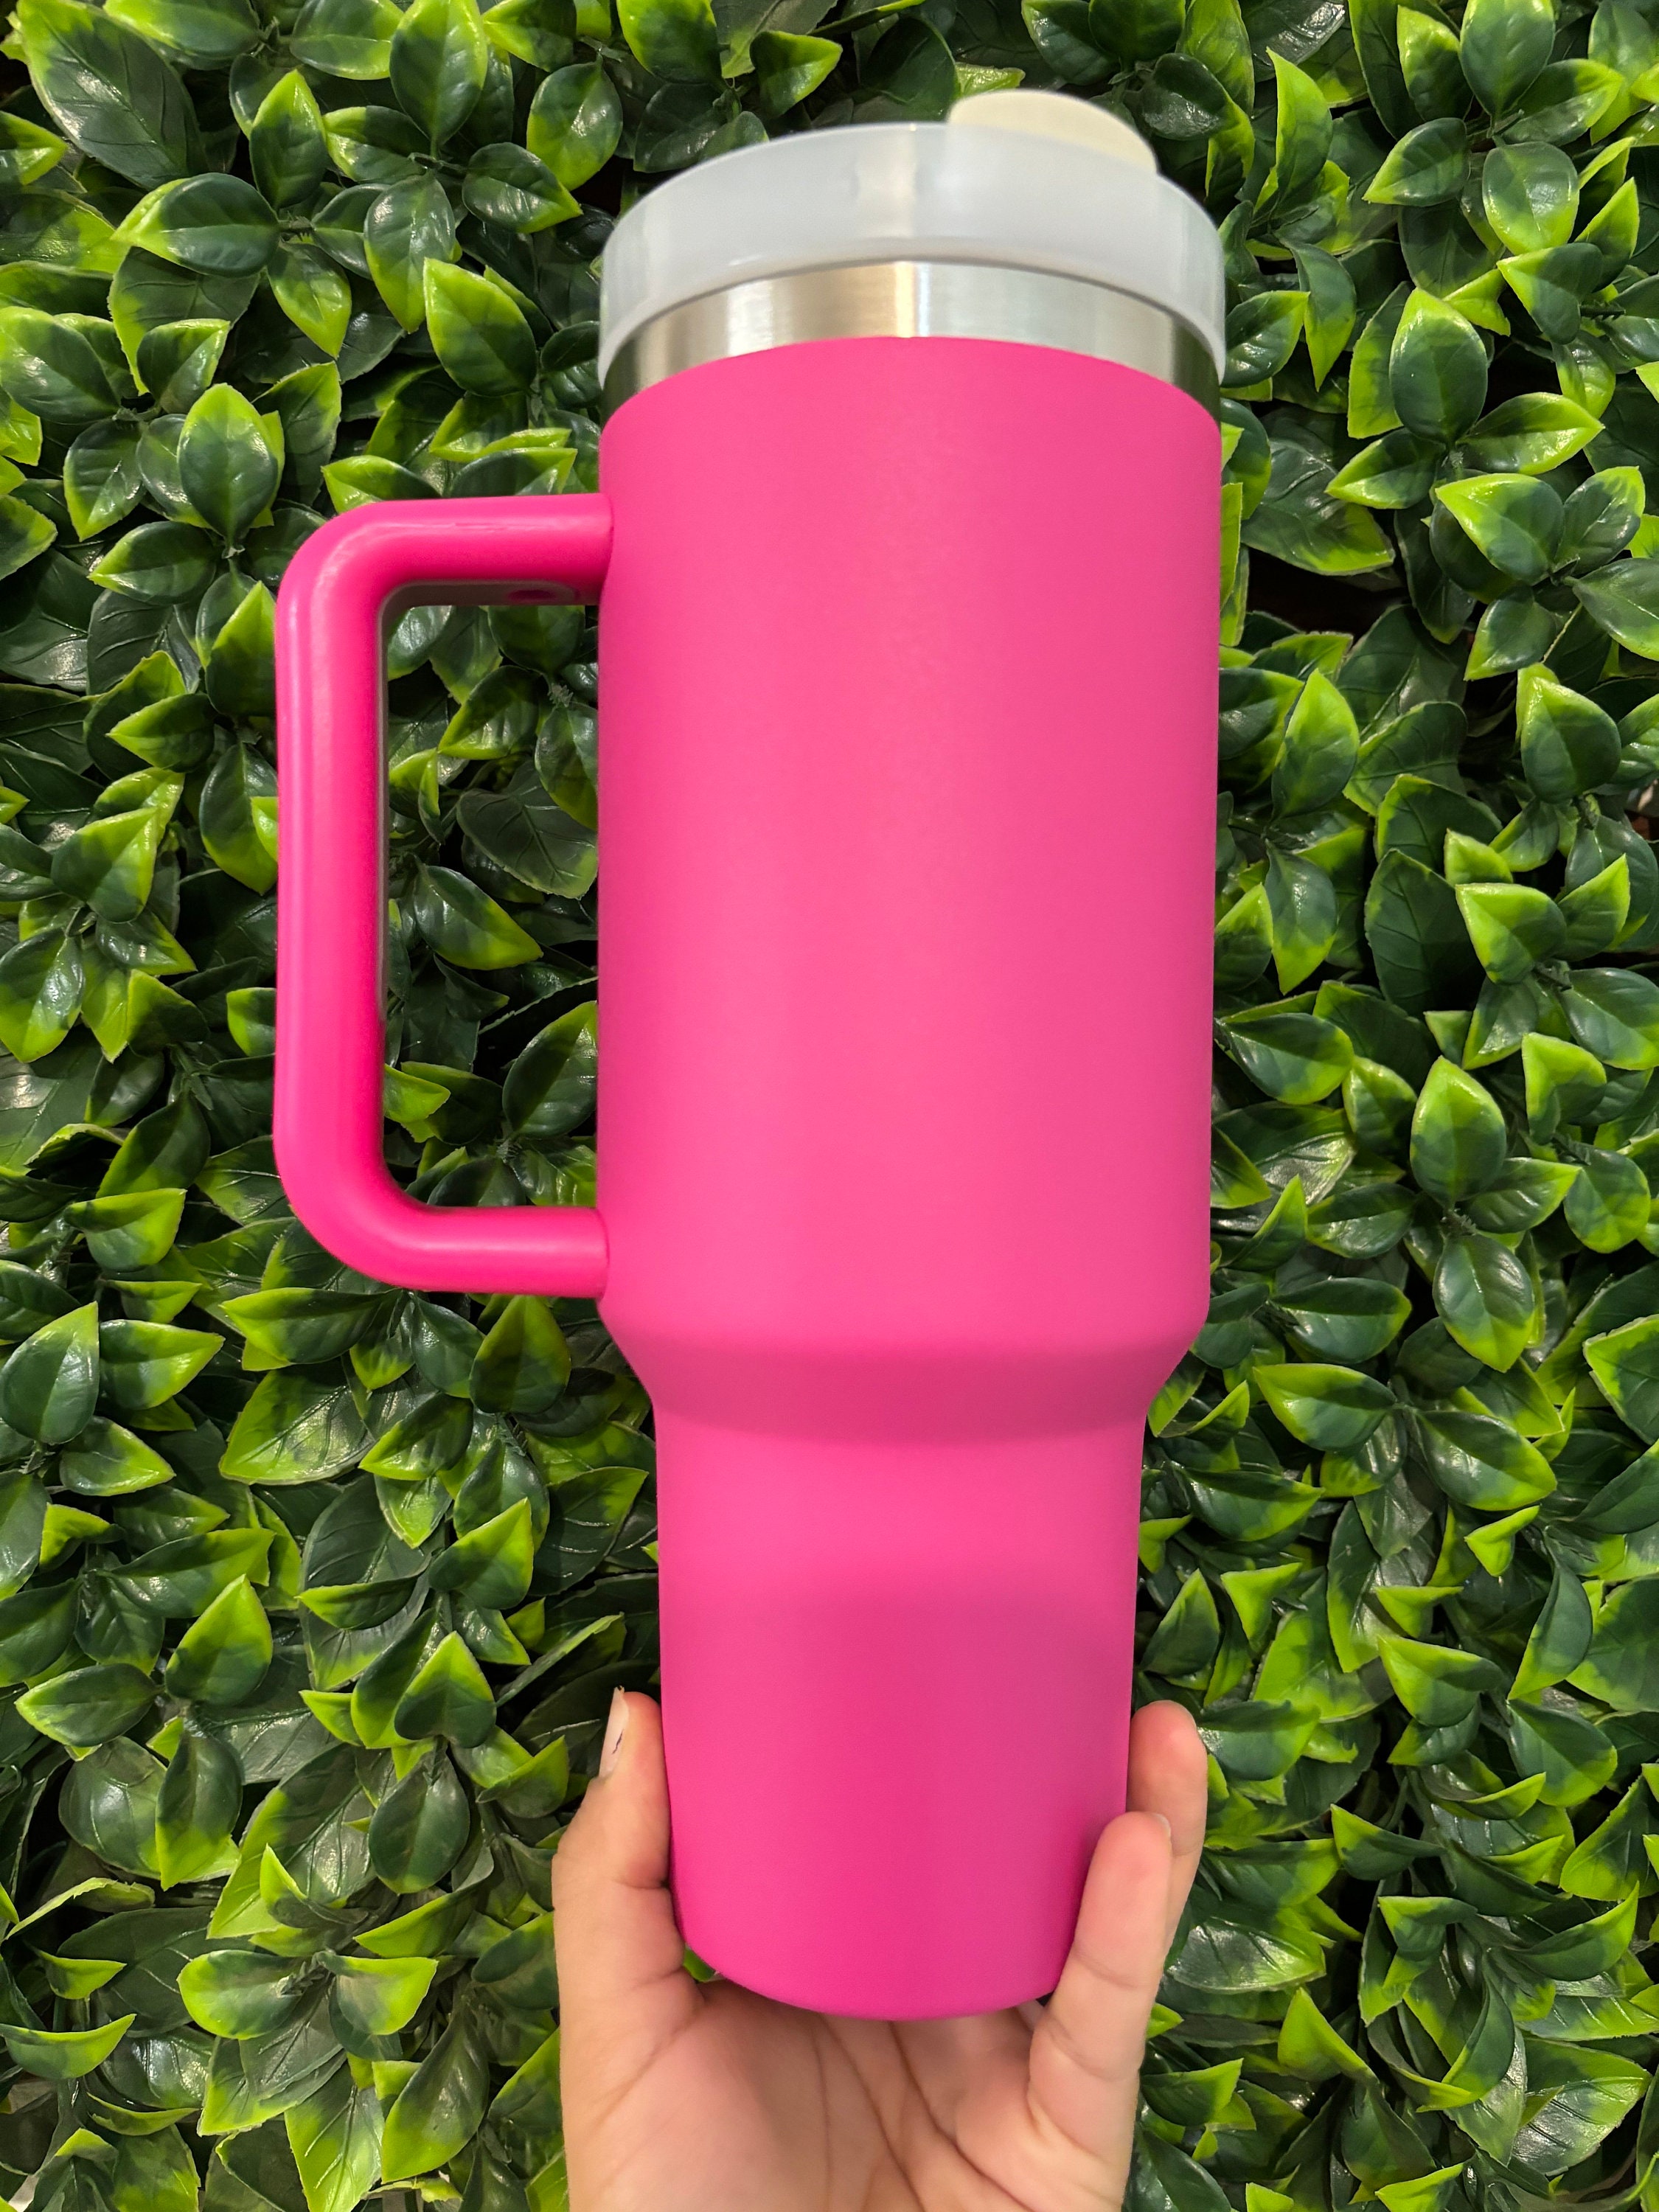 Simple Modern 40 Oz Tumbler With Handle And Straw Lid ( Finds) -  Stylish Stanley Tumbler - Pink Barbie Citron Dye Tie